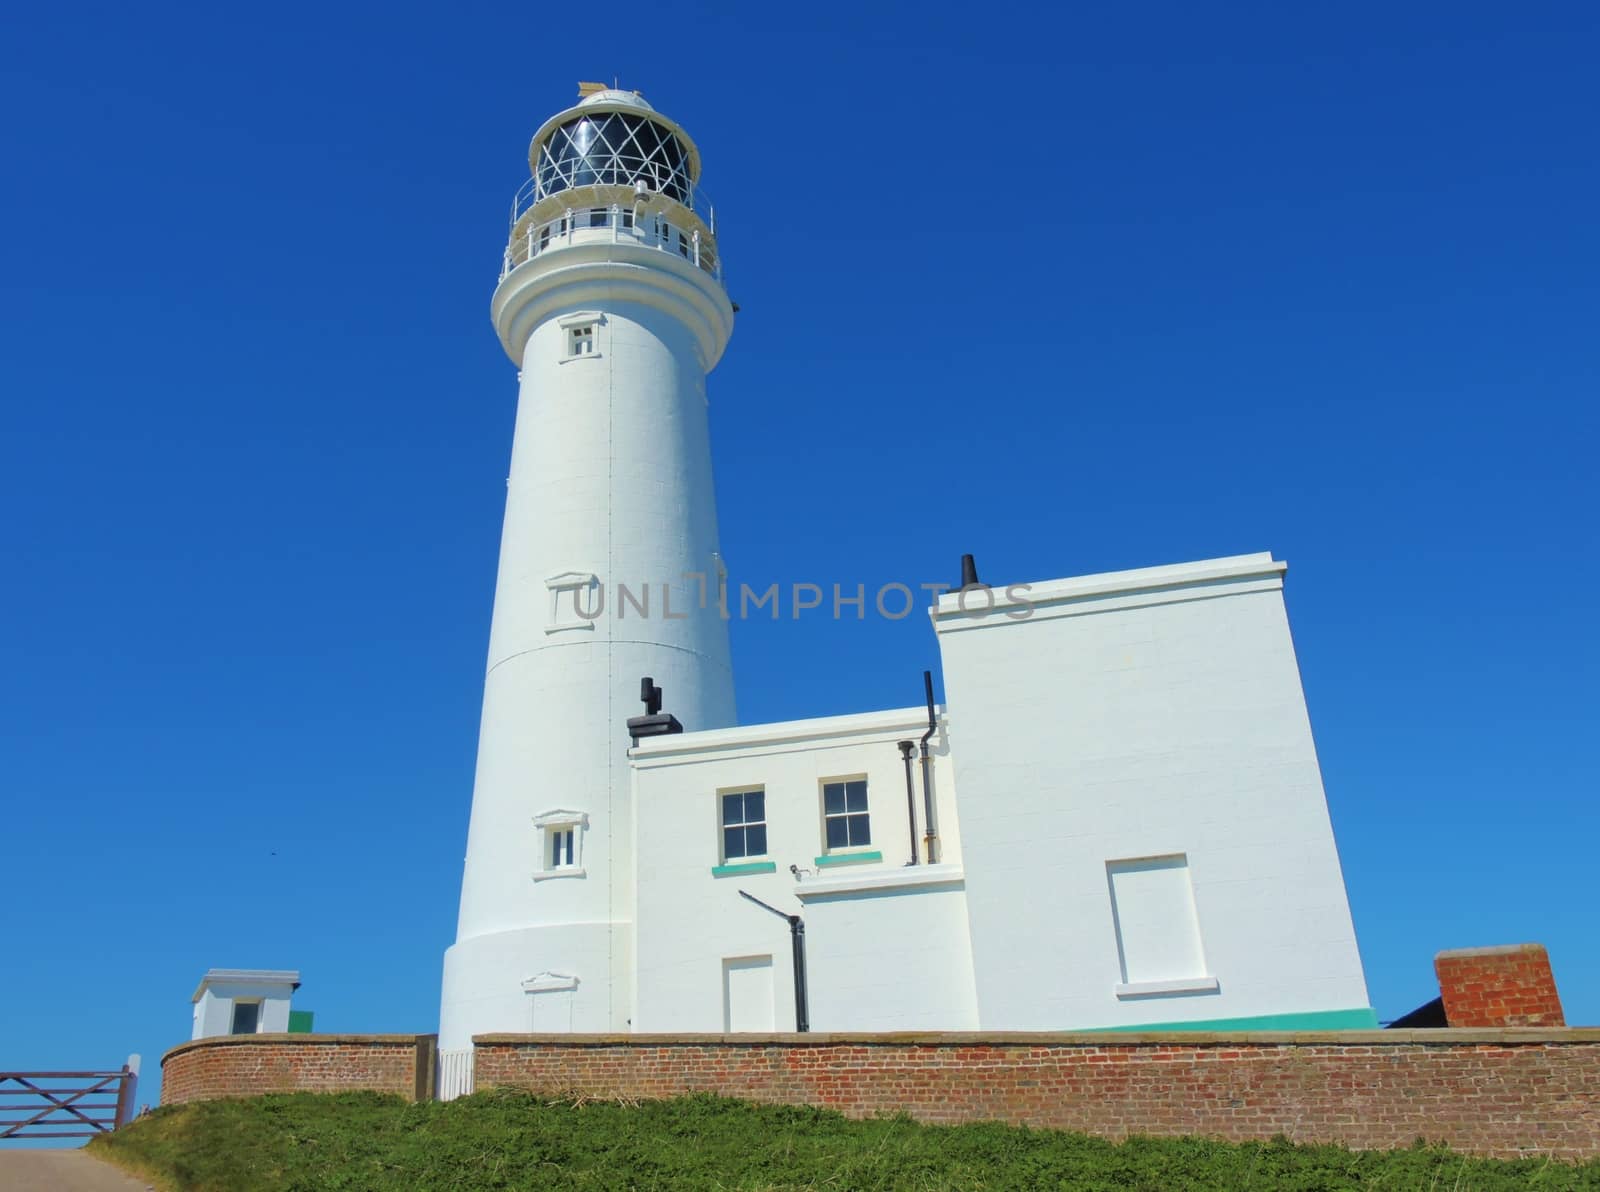 An image of the Lighthouse at Flamborough Head on the Yorkshire coast.